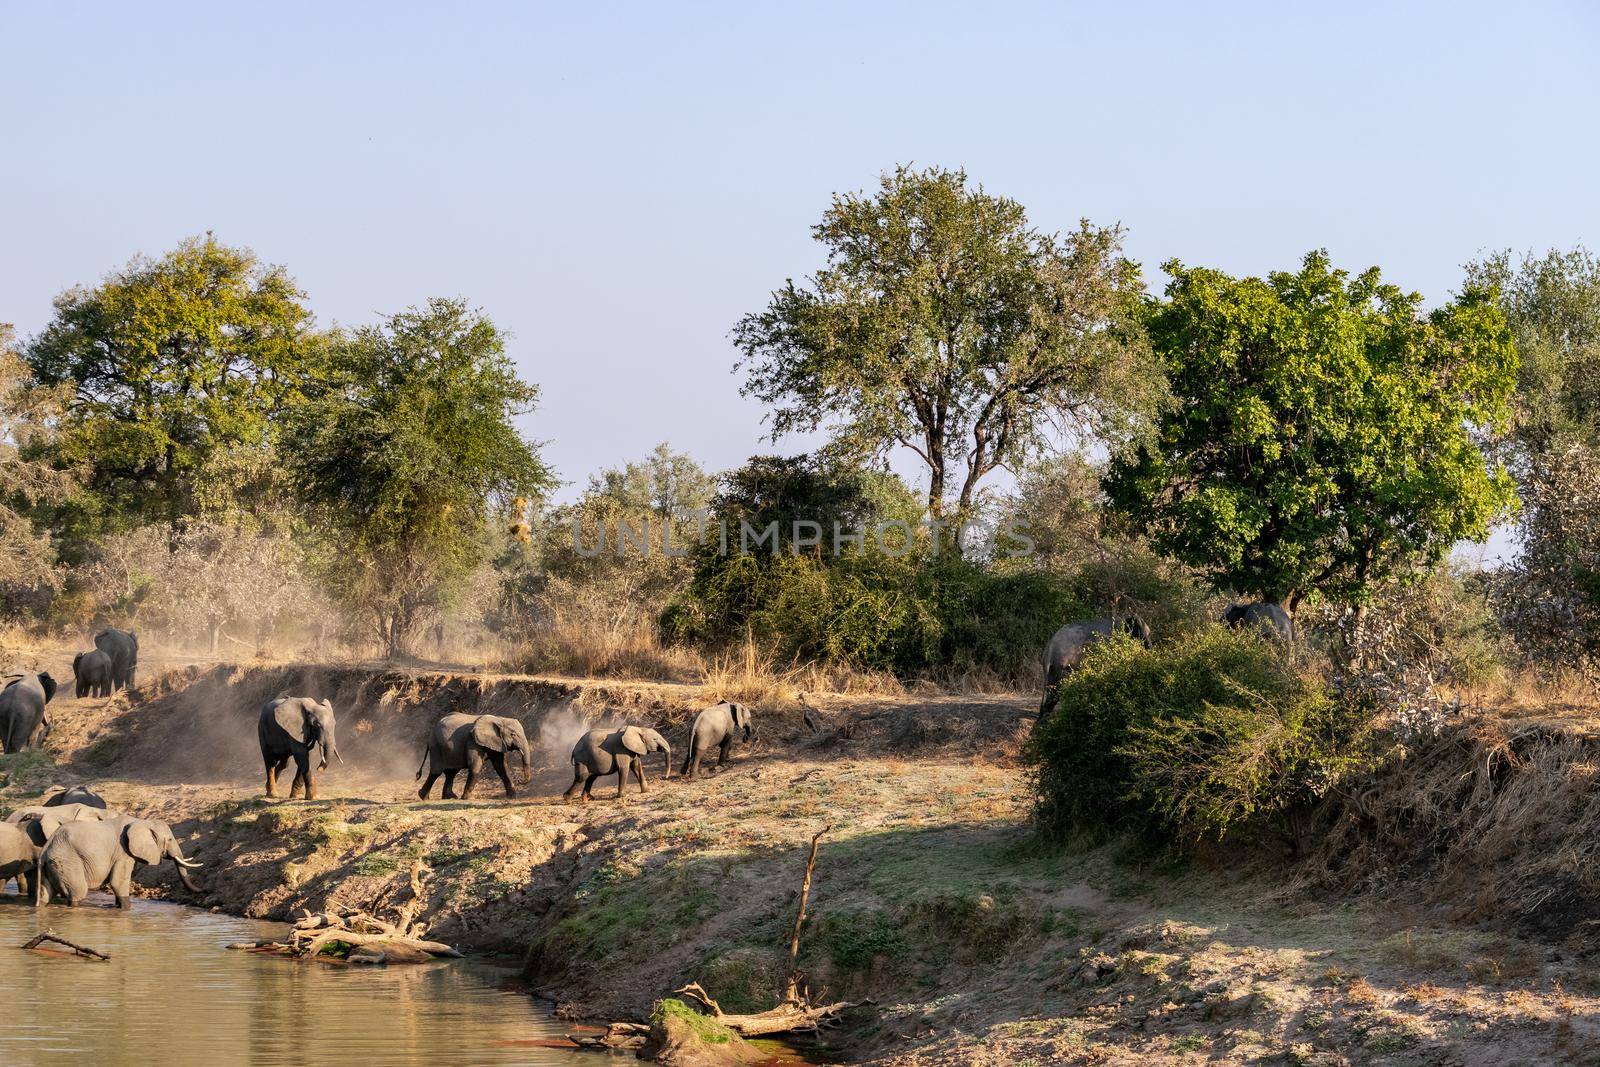 Amazing close up of a huge elephants group crossing the waters of an African river by silentstock639